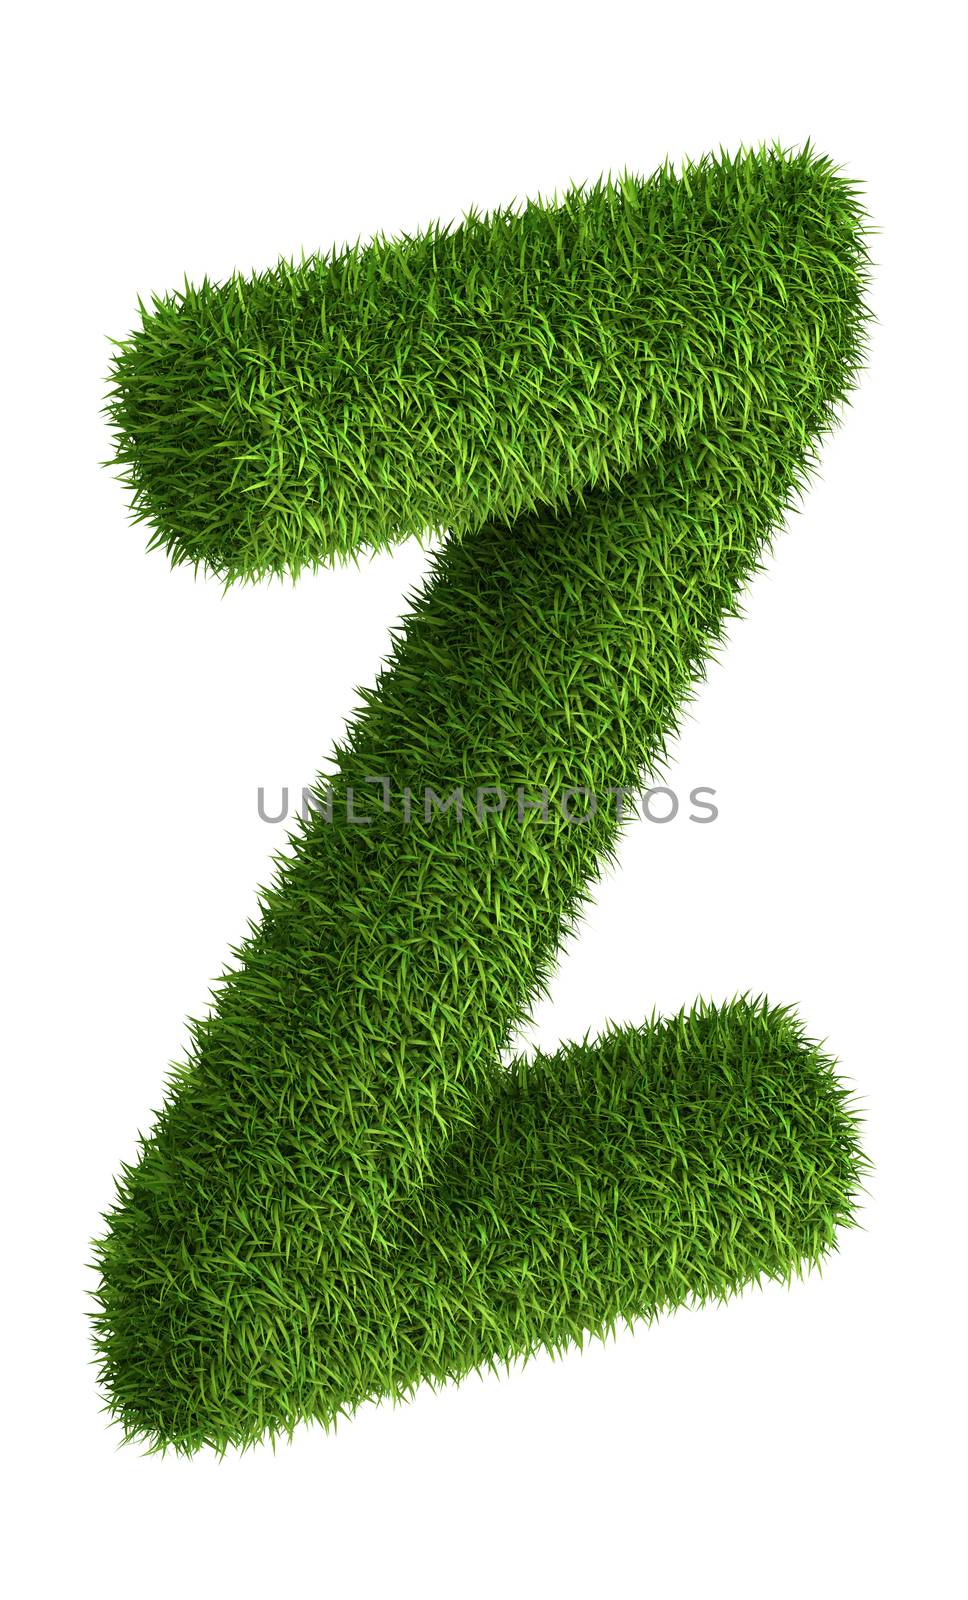 Natural grass letter Z by iunewind